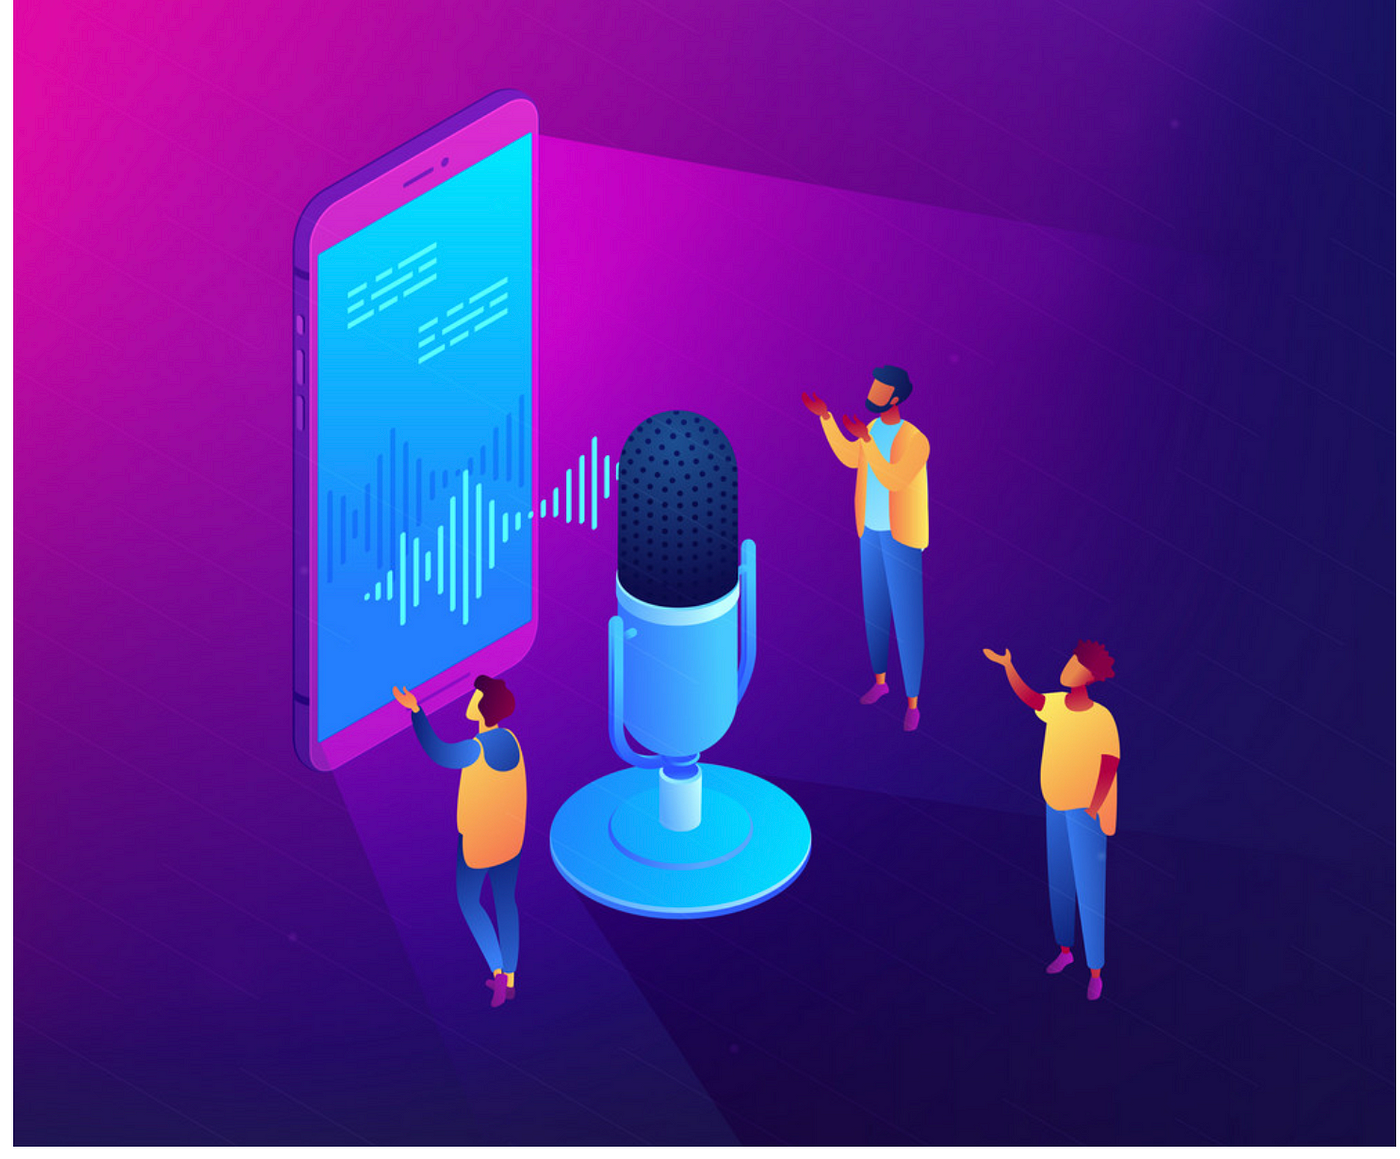 What Benefits in a Personal Voice Assistant Technology